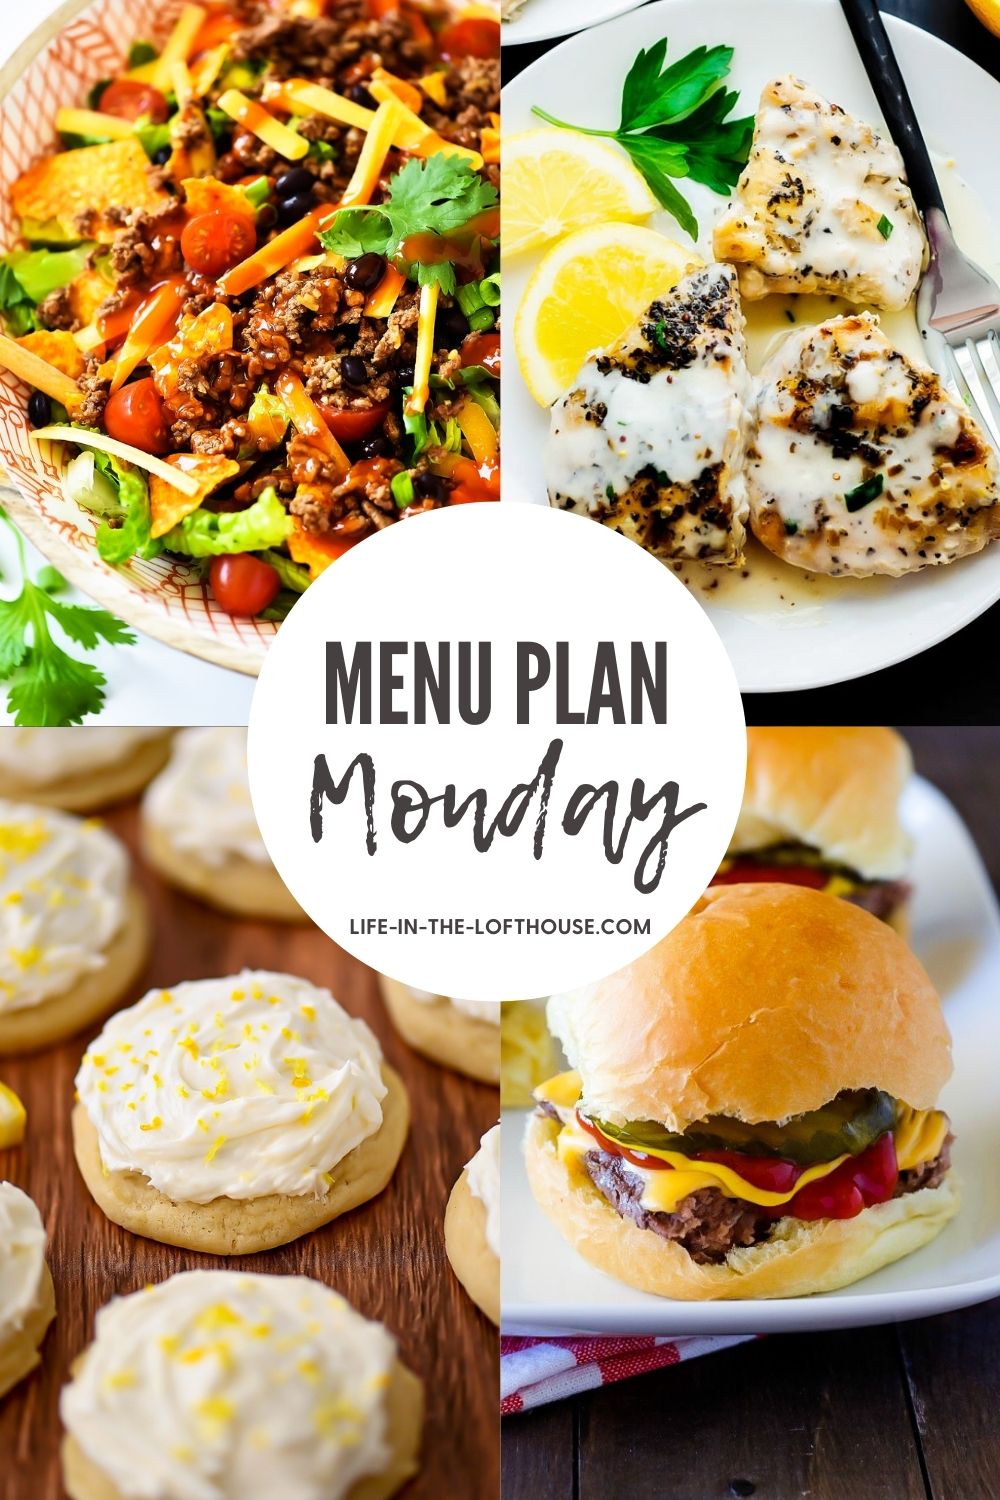 Menu Plan Monday is a list of easy and delicious dinner recipes.